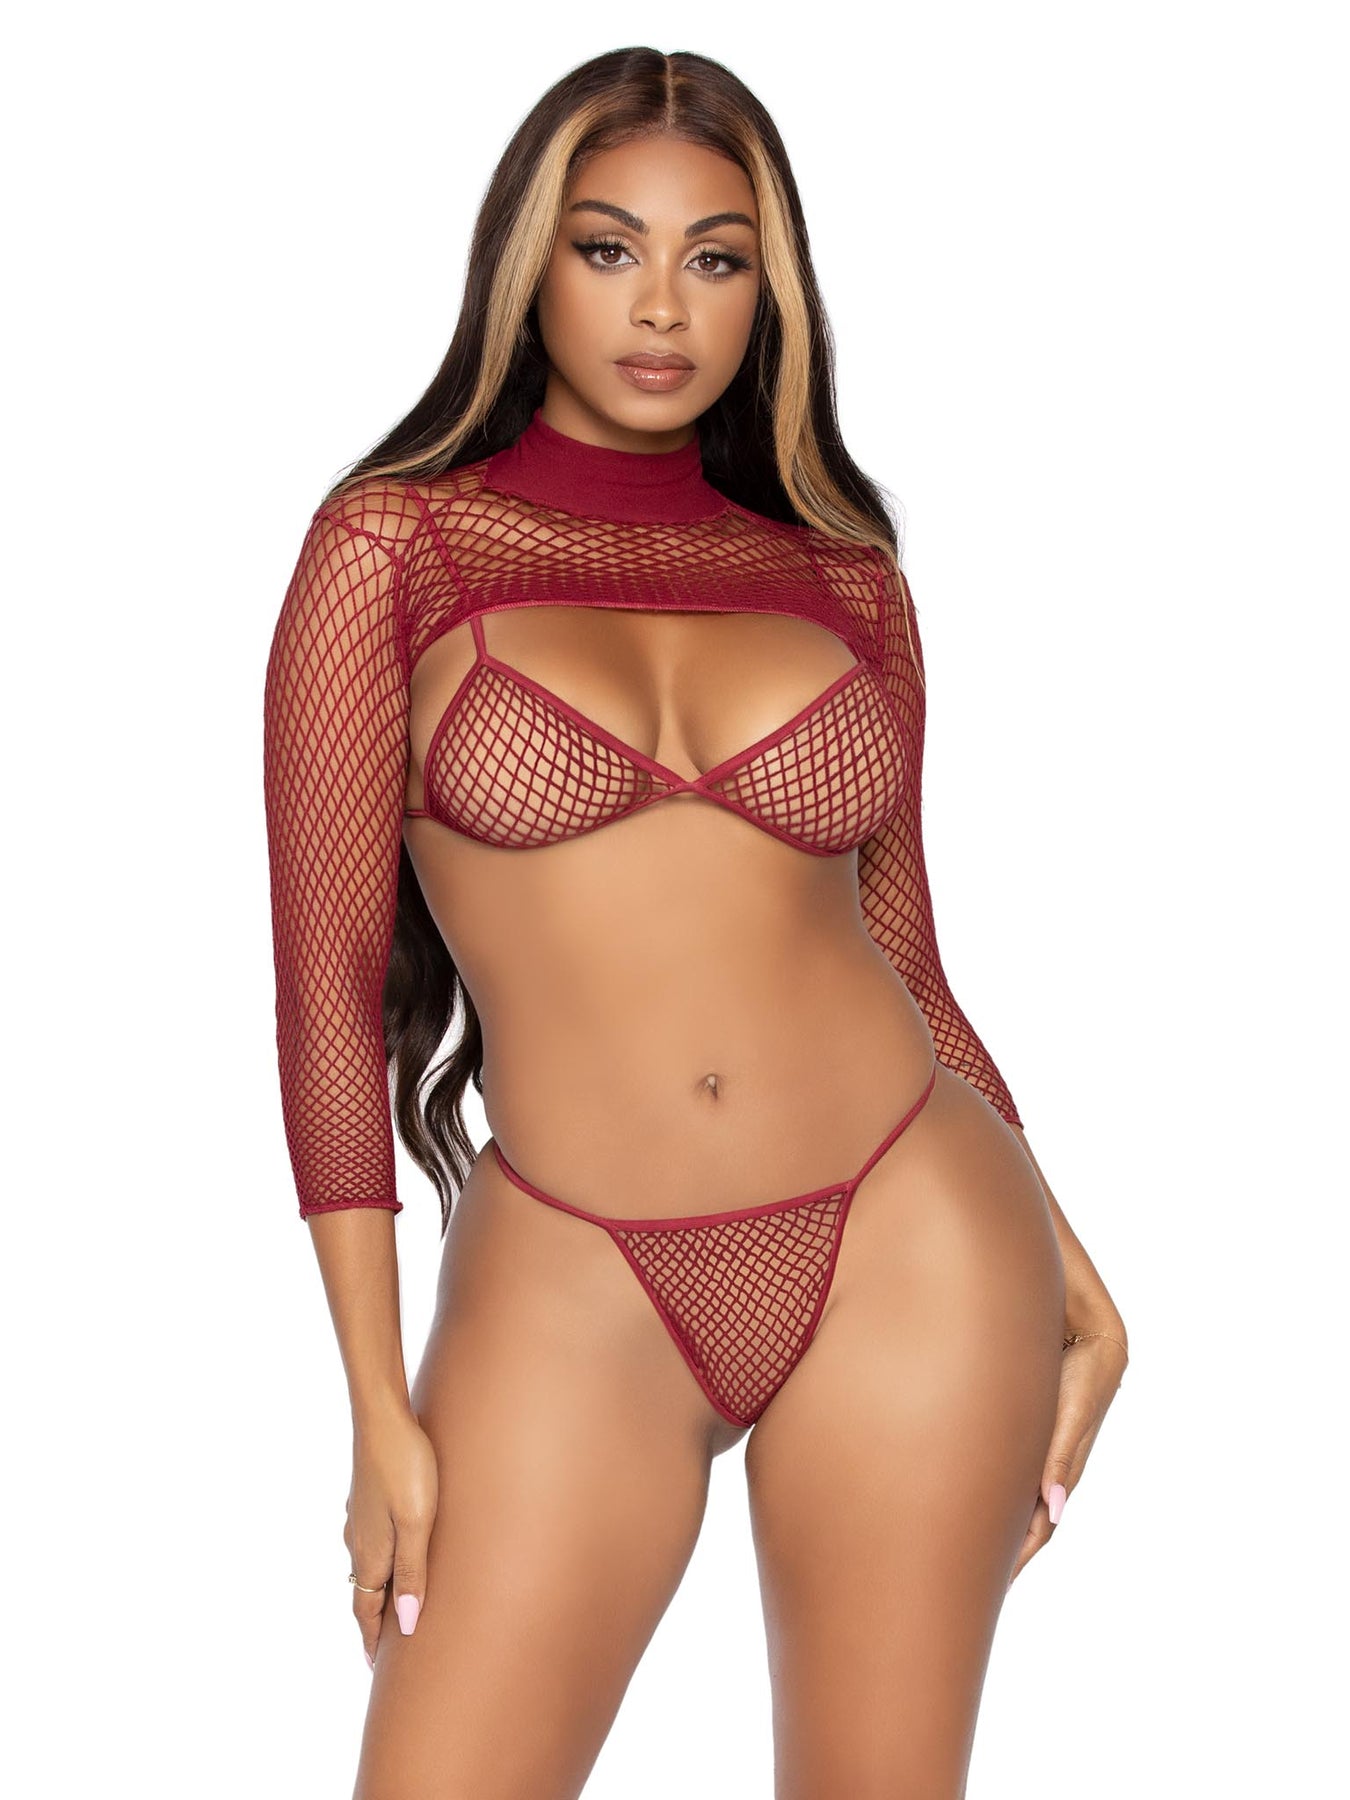 3 Pc Industrial Net Bikini Top G-String and Long  Sleeved Crop Top - One Size - Burgundy